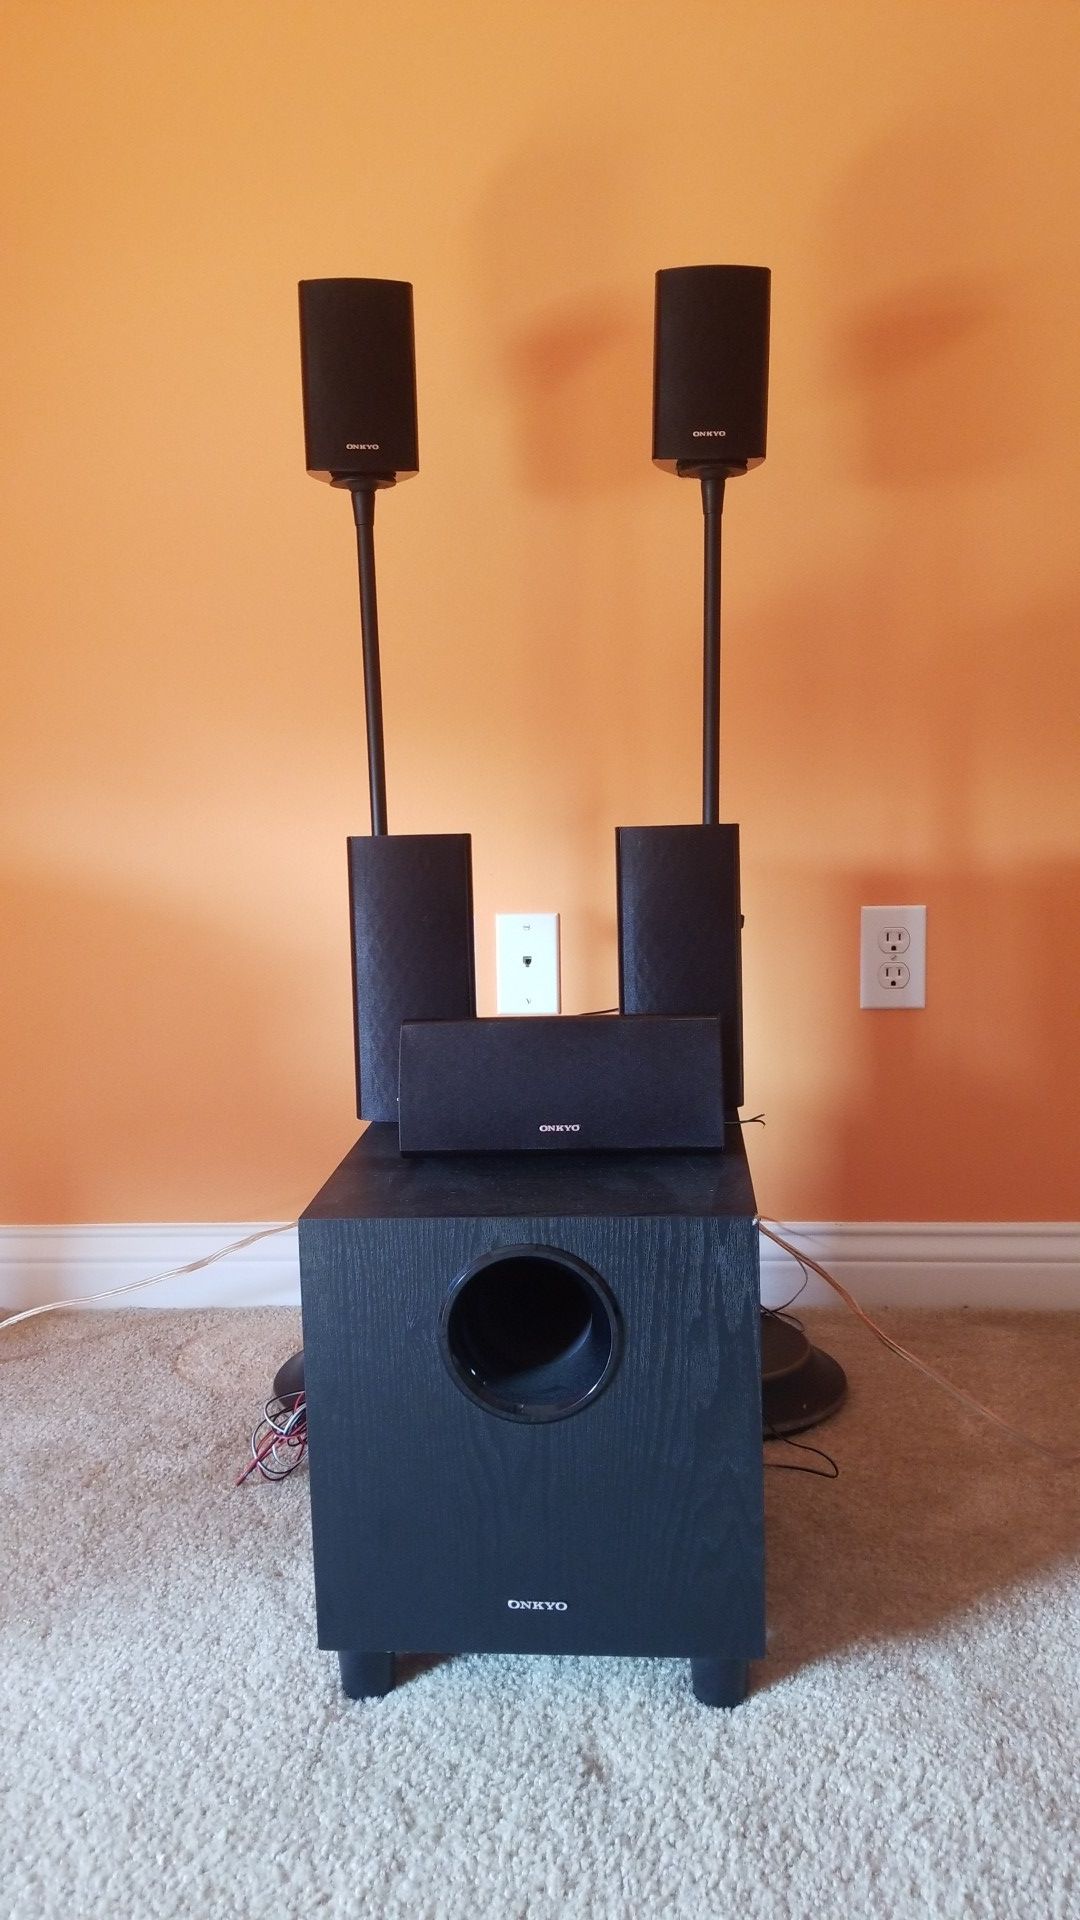 Onkyo Surround Speakers with subwoofer